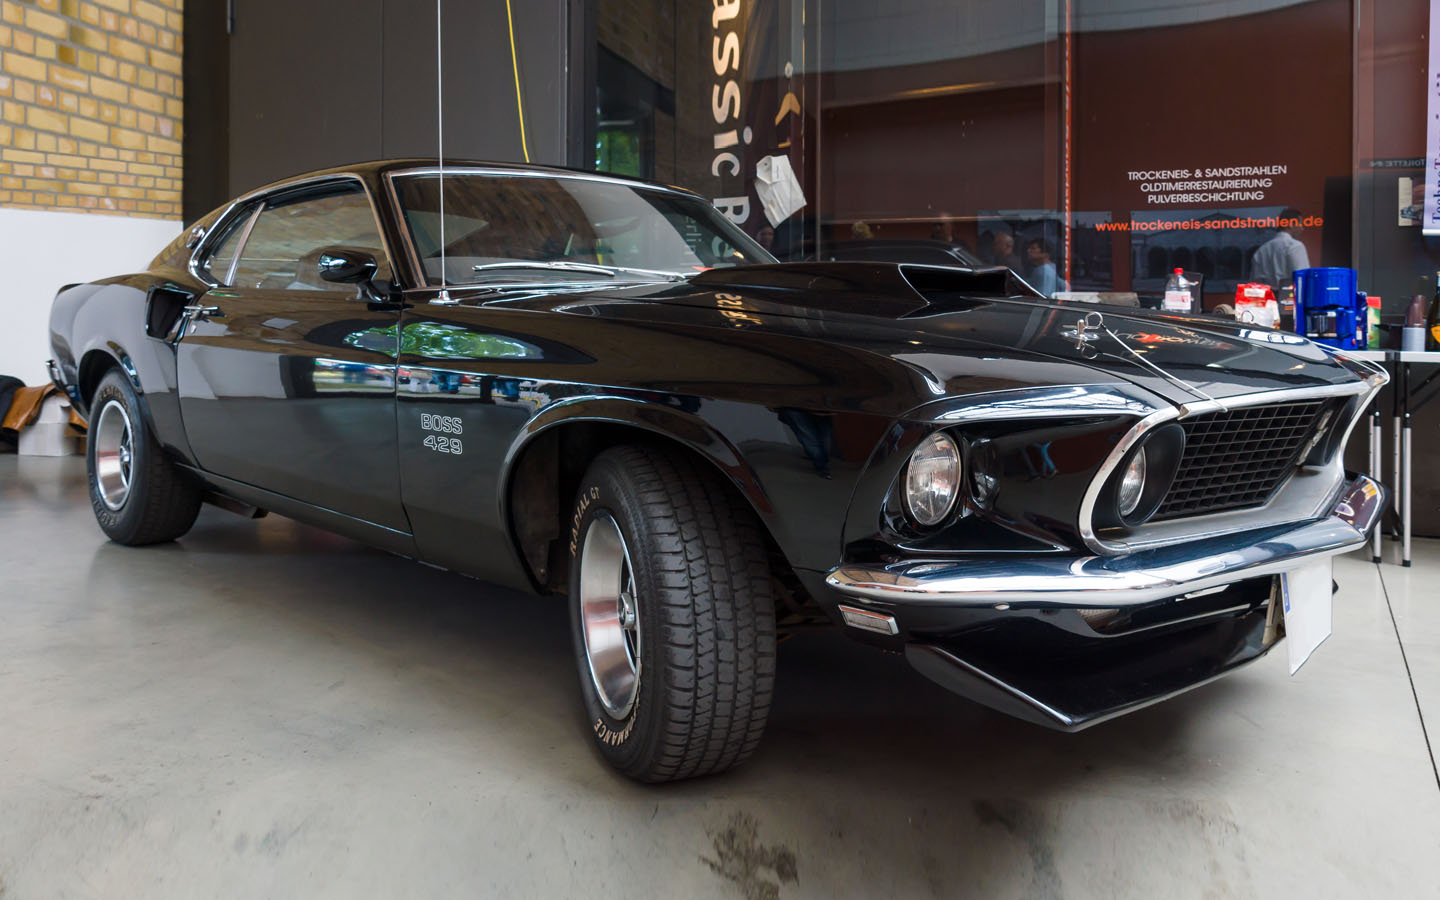 1969 Ford Mustang Boss 429 is among the famous John wick movie cars